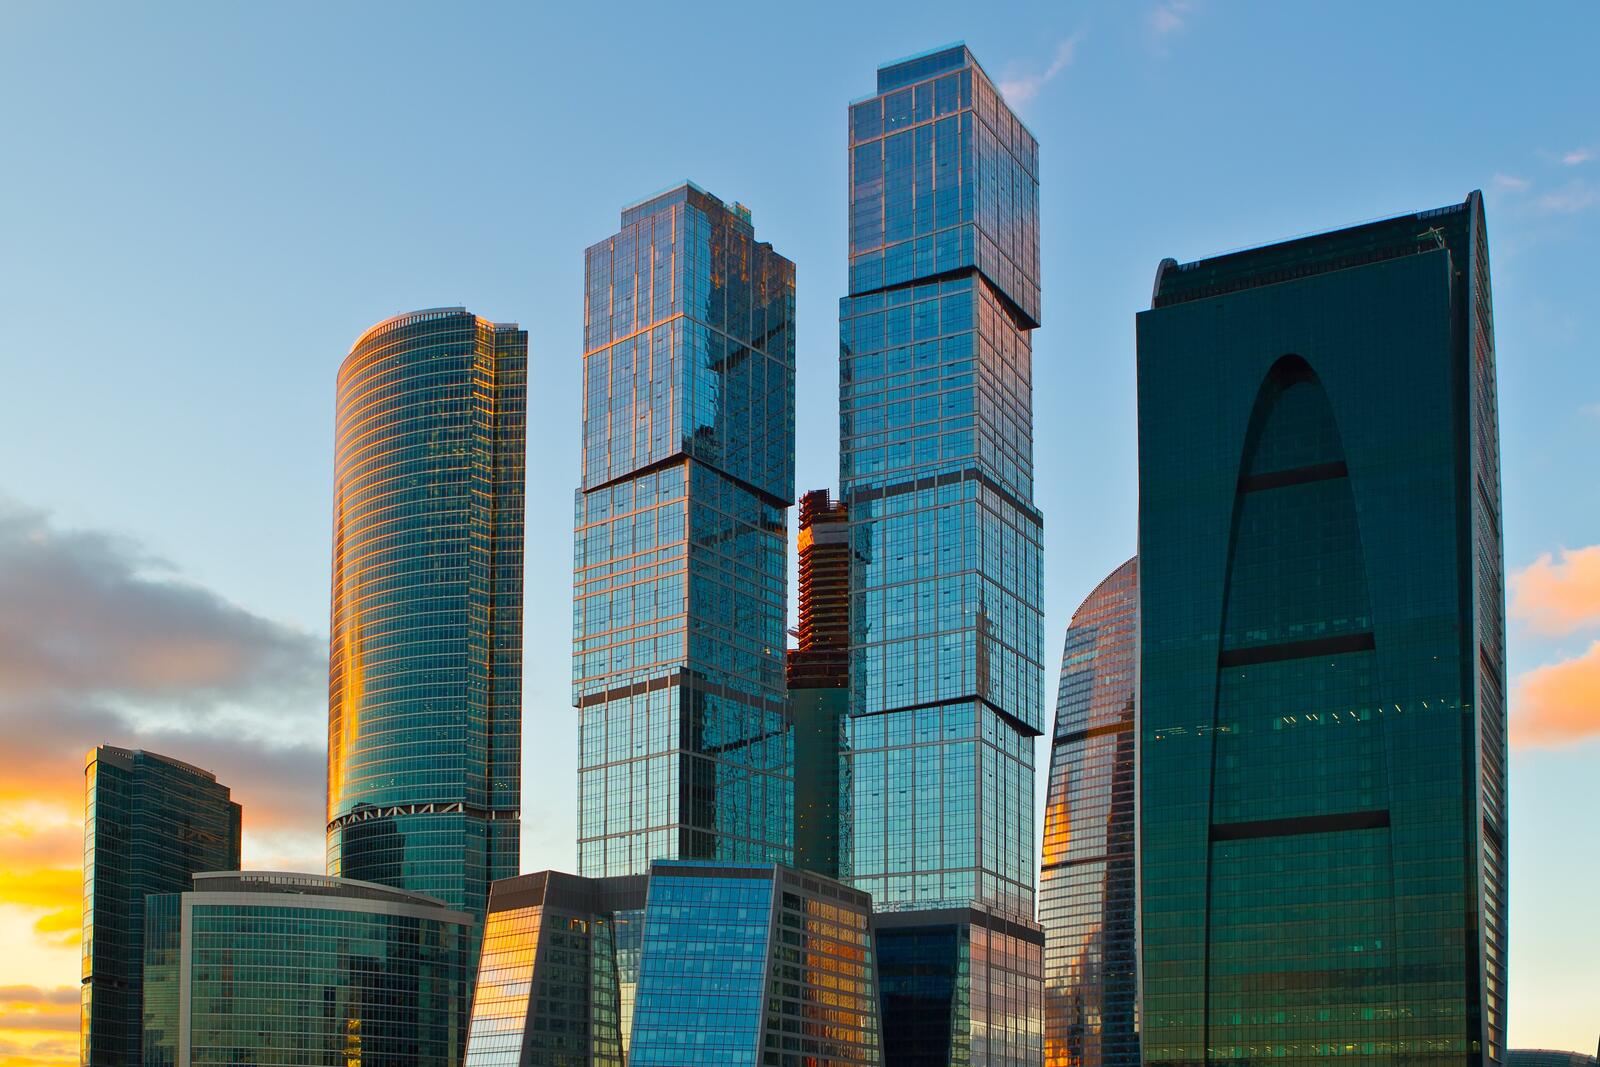 Wallpapers moscow skyscrapers buildings on the desktop